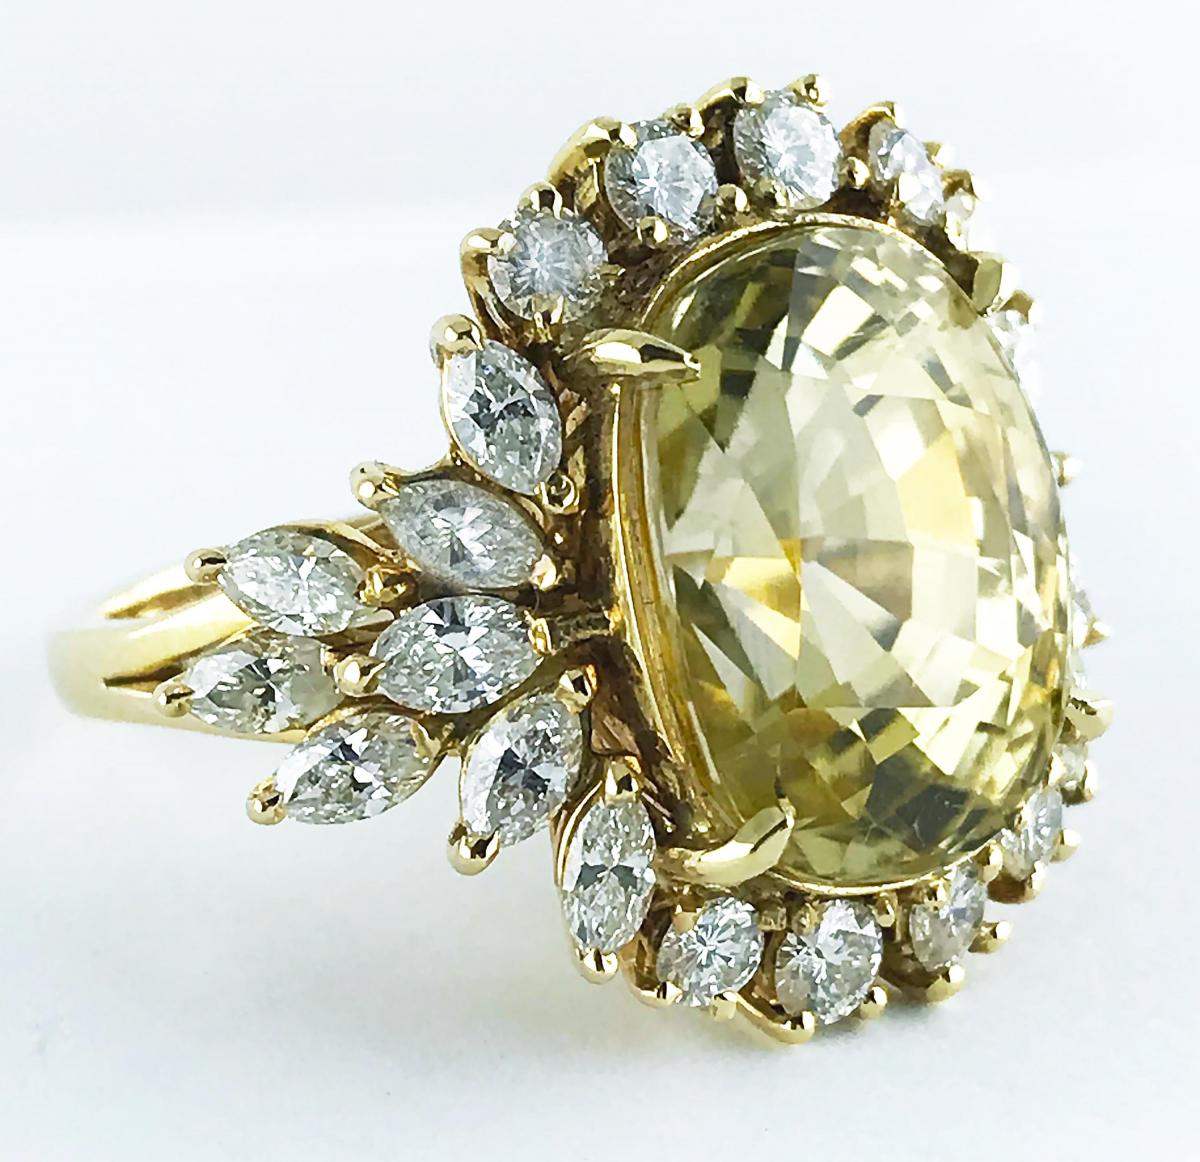 Certified Natural 16.39 Carat Cushion Cut Yellow Sapphire and Diamond Ring